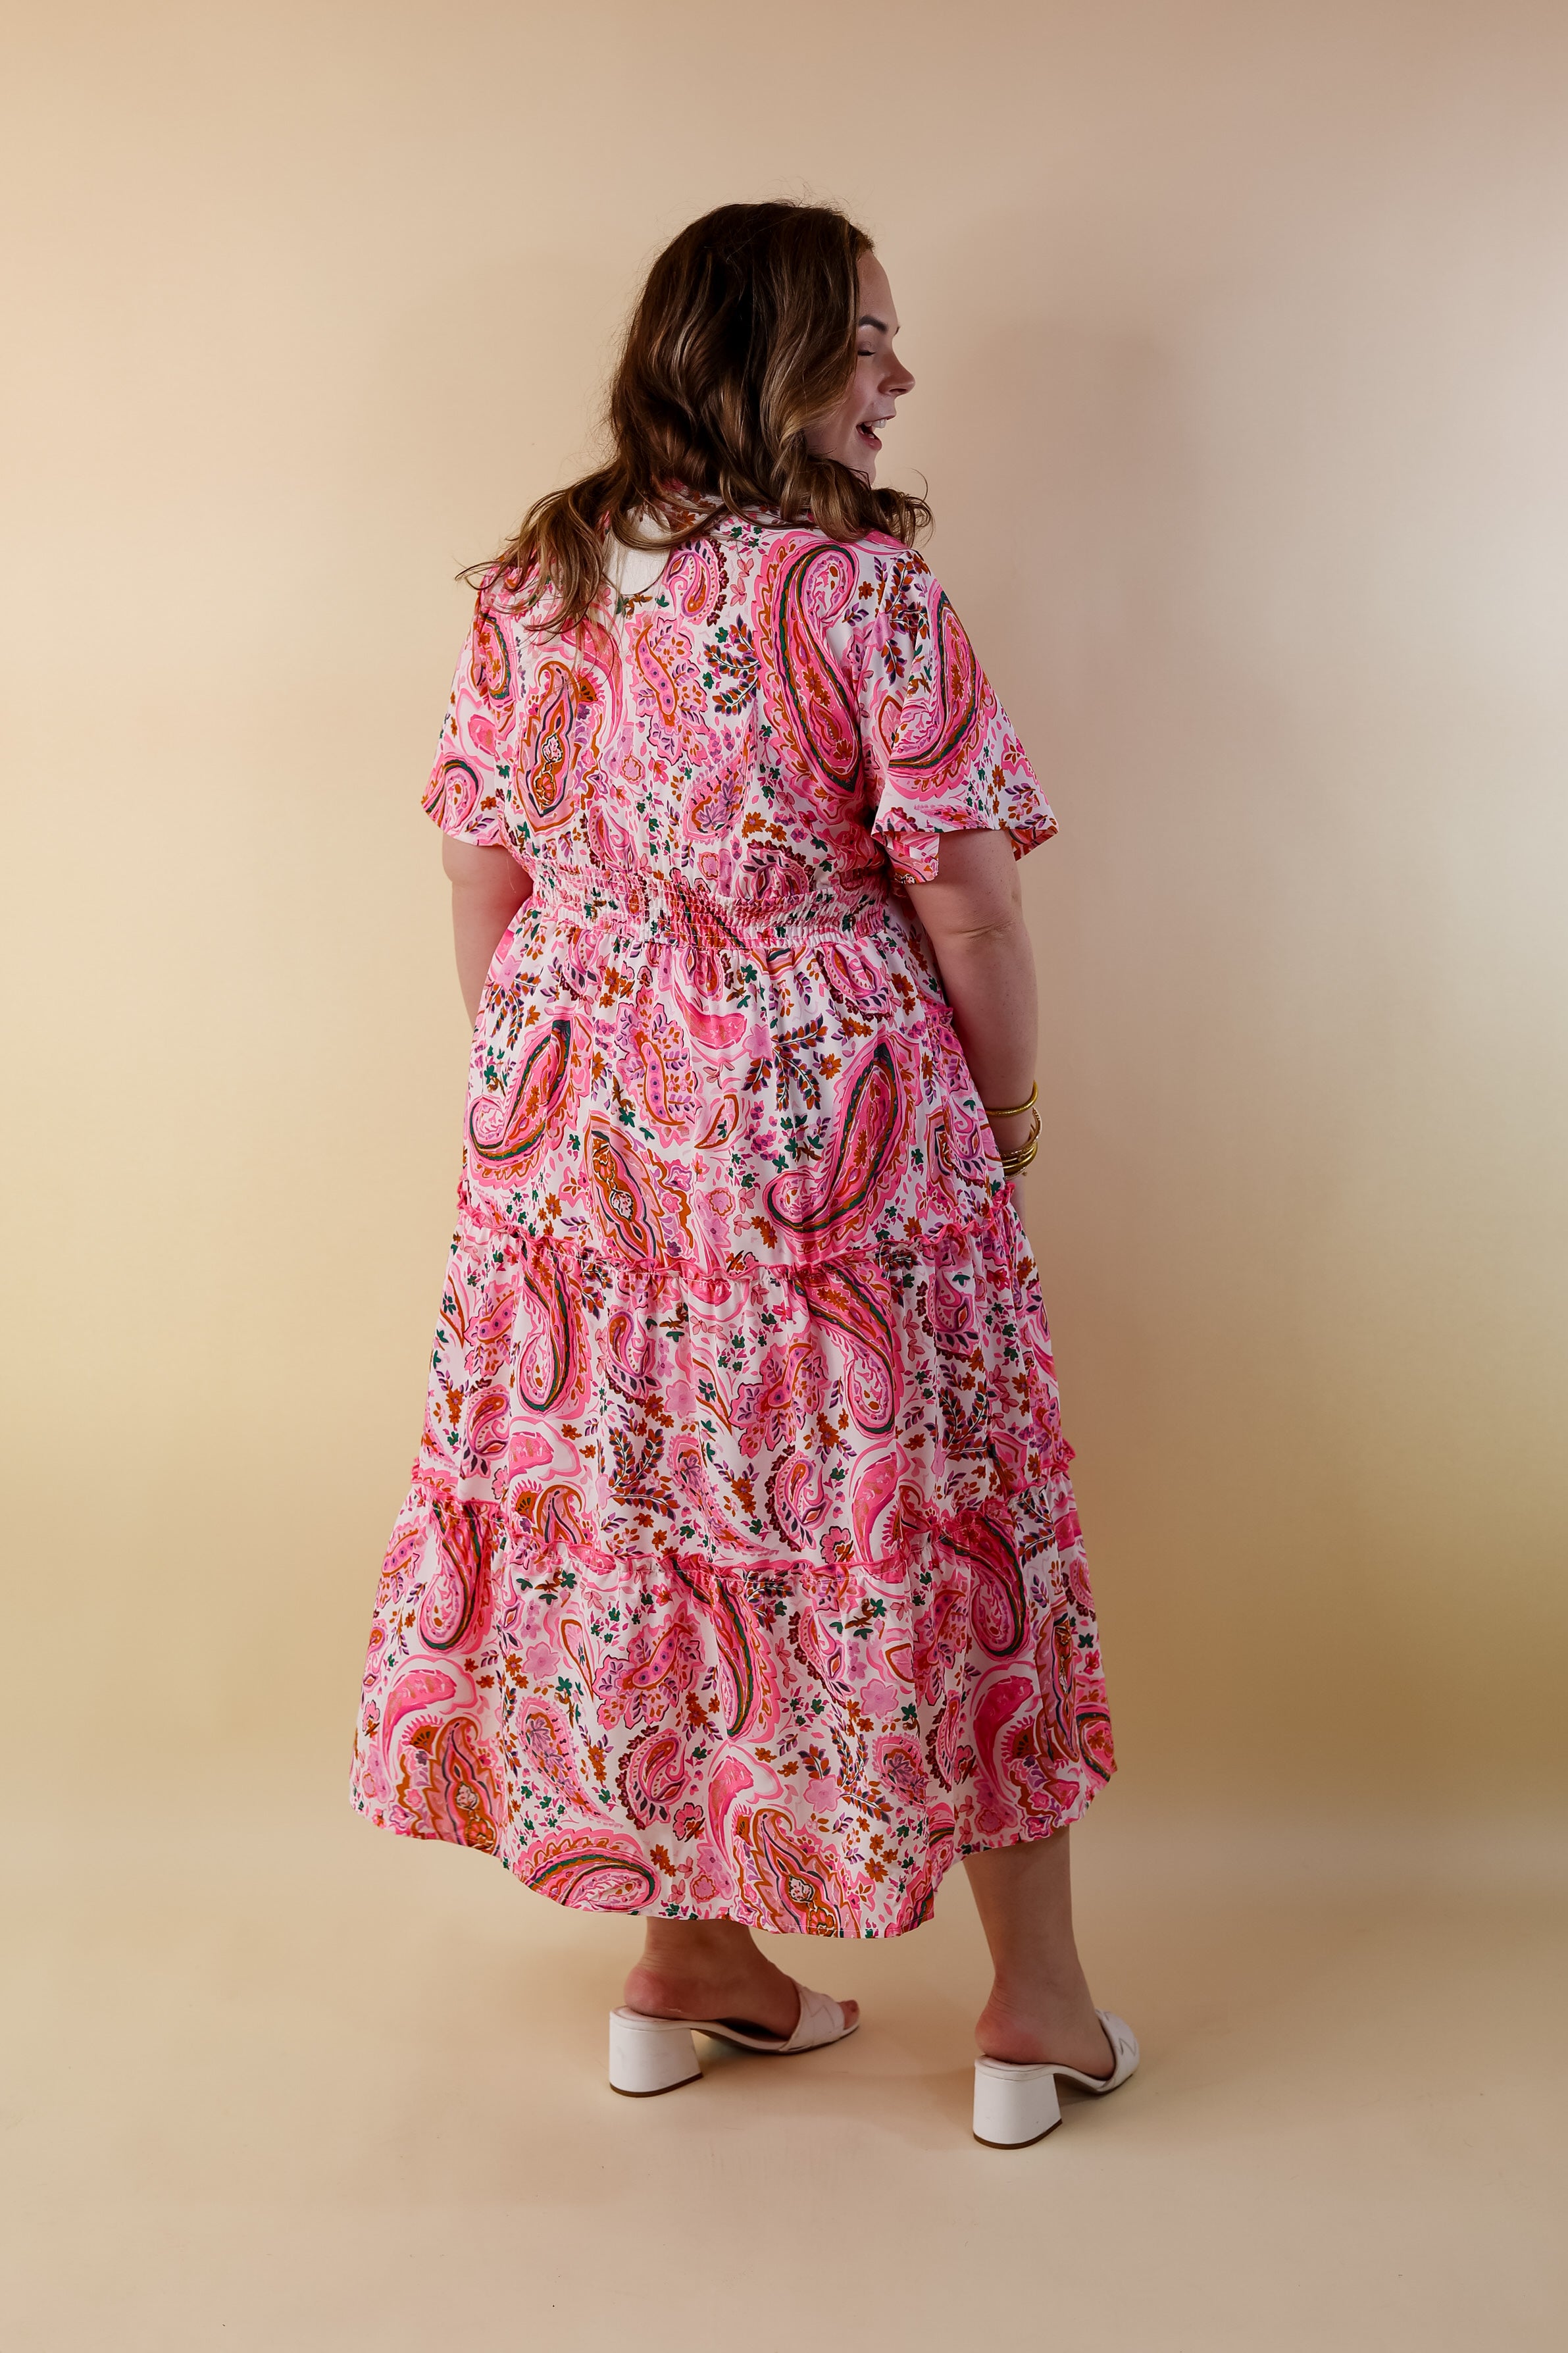 Whispers of Wisteria Paisley Tiered Midi Dress in Pink Mix - Giddy Up Glamour Boutique